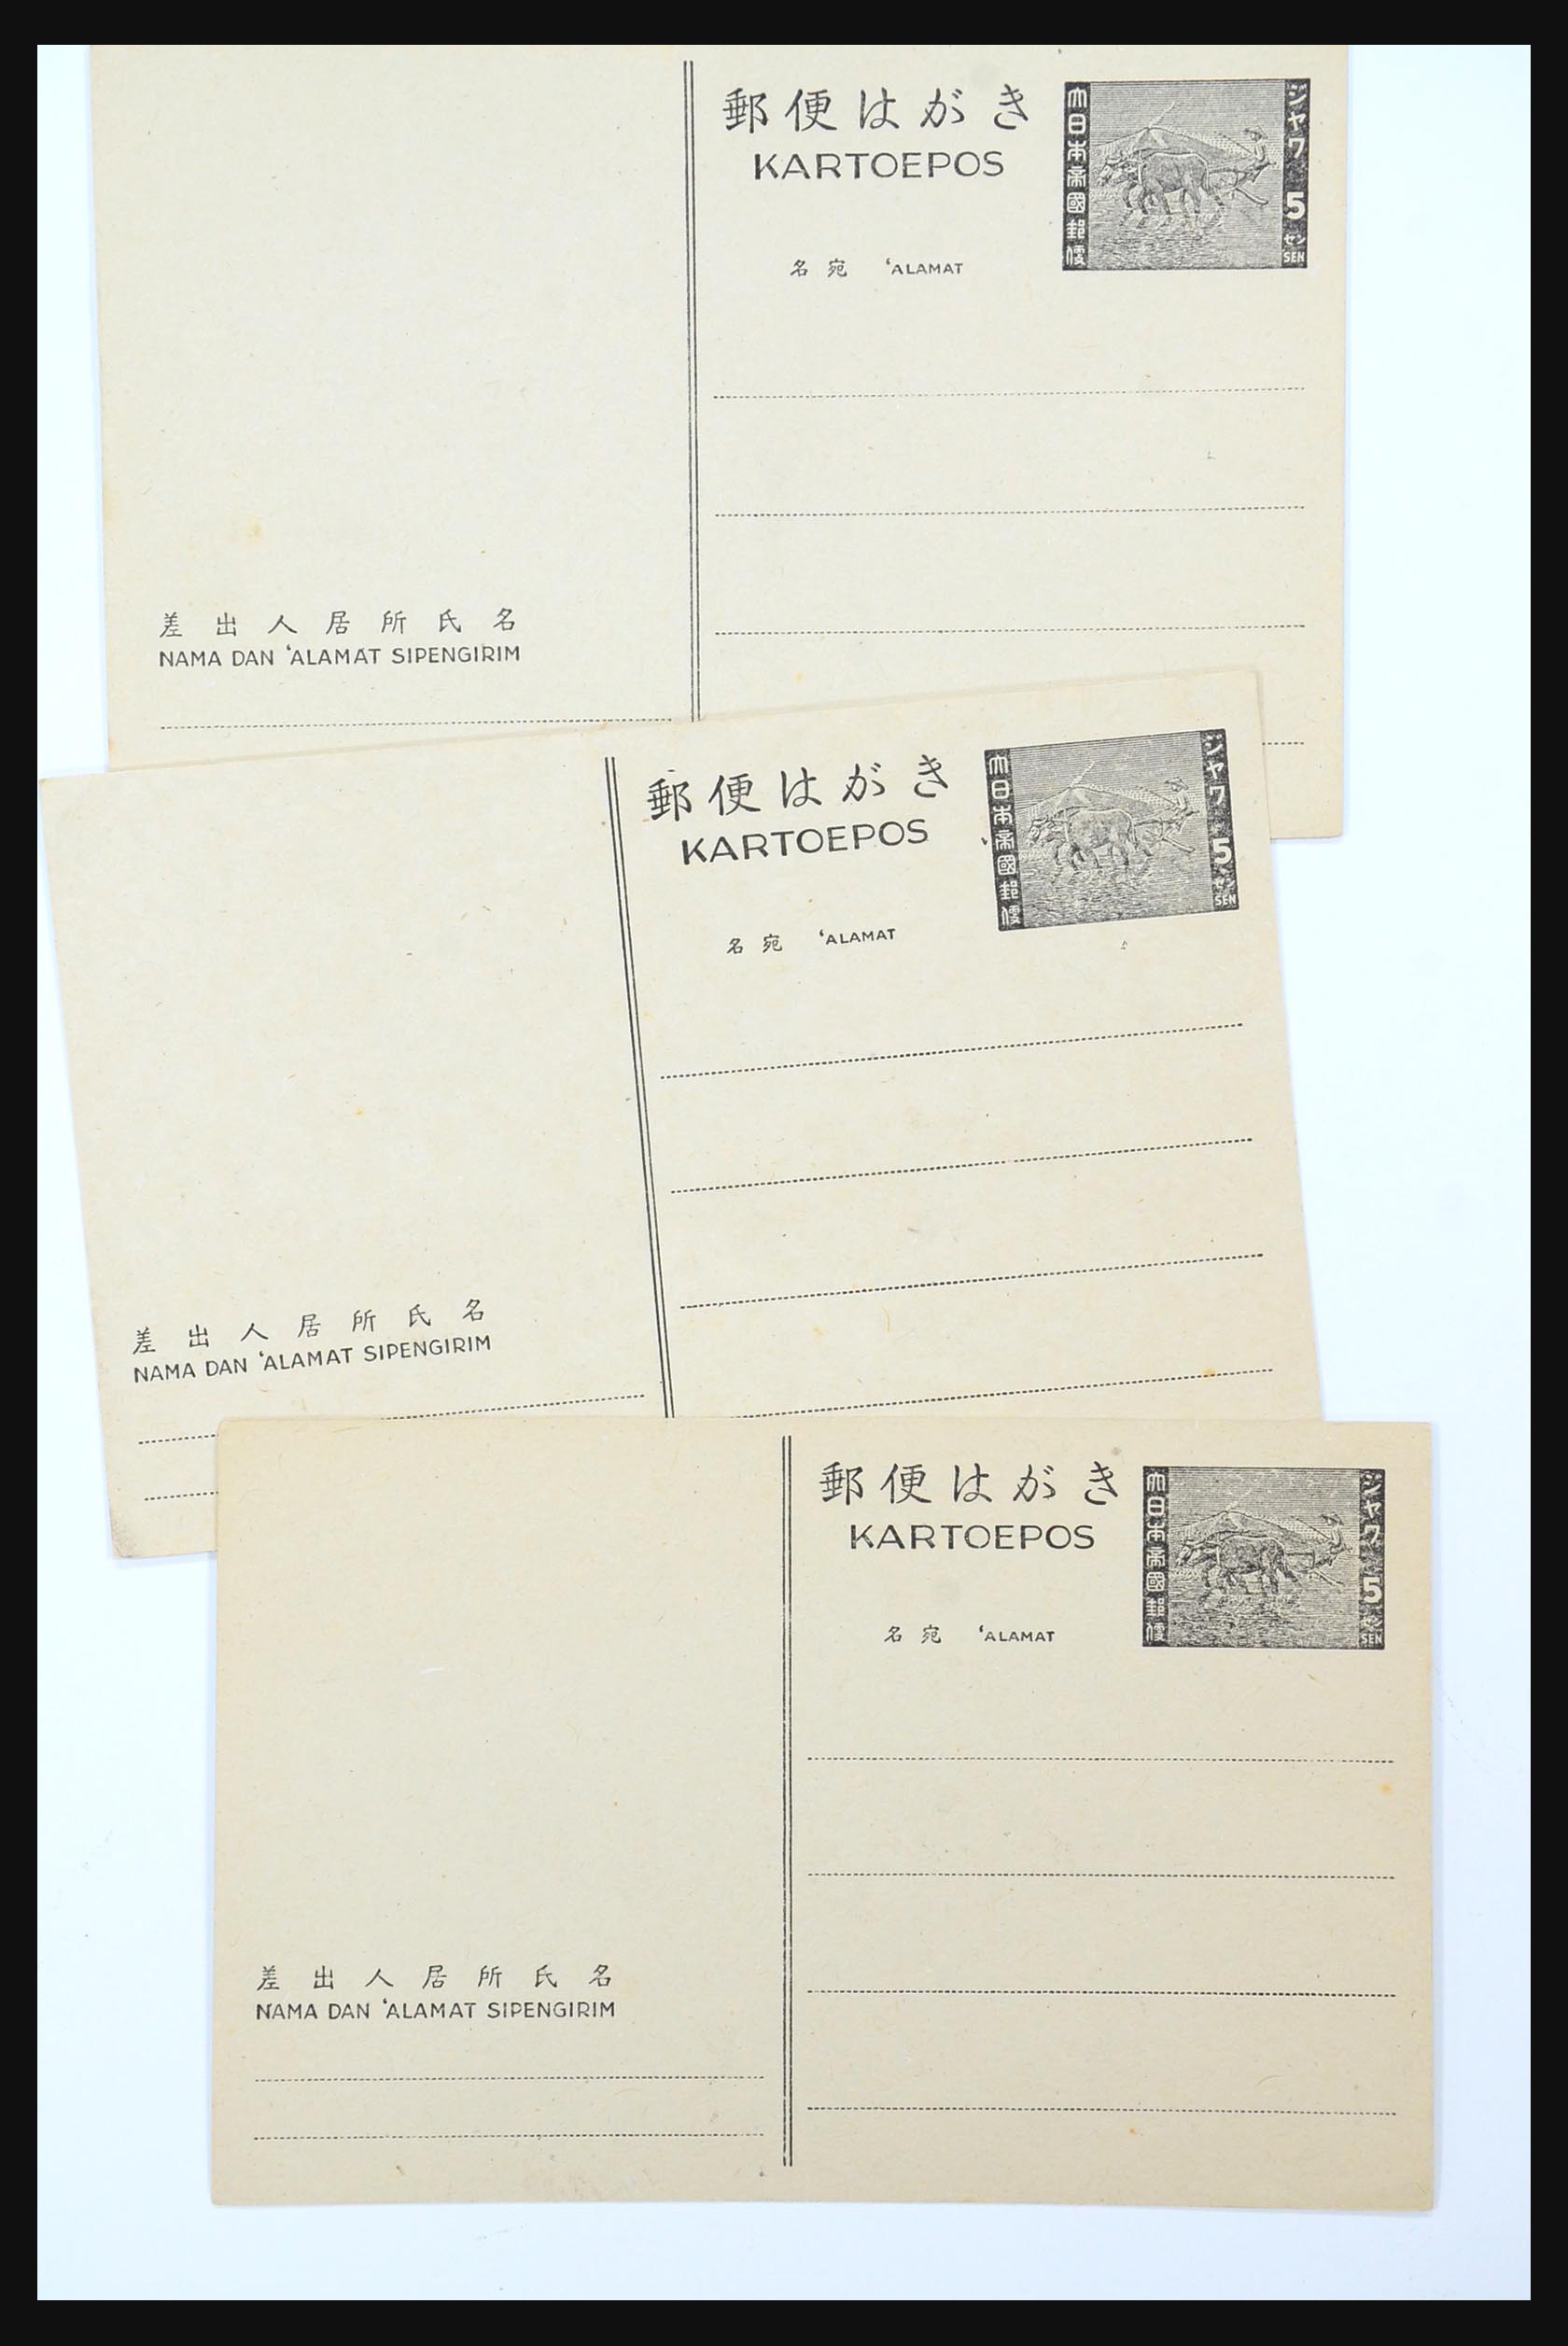 31362 075 - 31362 Netherlands Indies Japanese occupation covers 1942-1945.